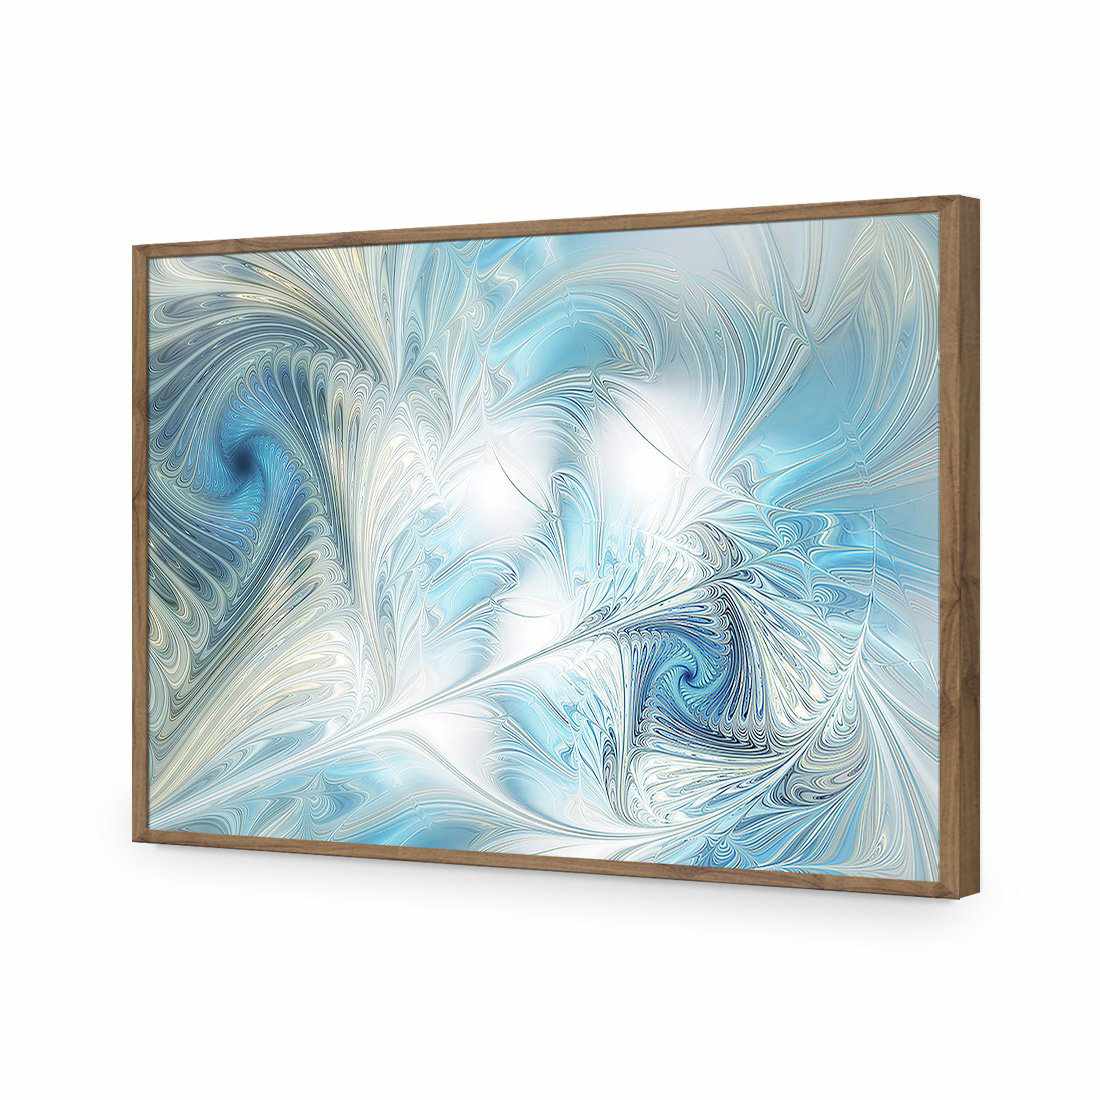 Travesty-Acrylic-Wall Art Design-Without Border-Acrylic - Natural Frame-45x30cm-Wall Art Designs